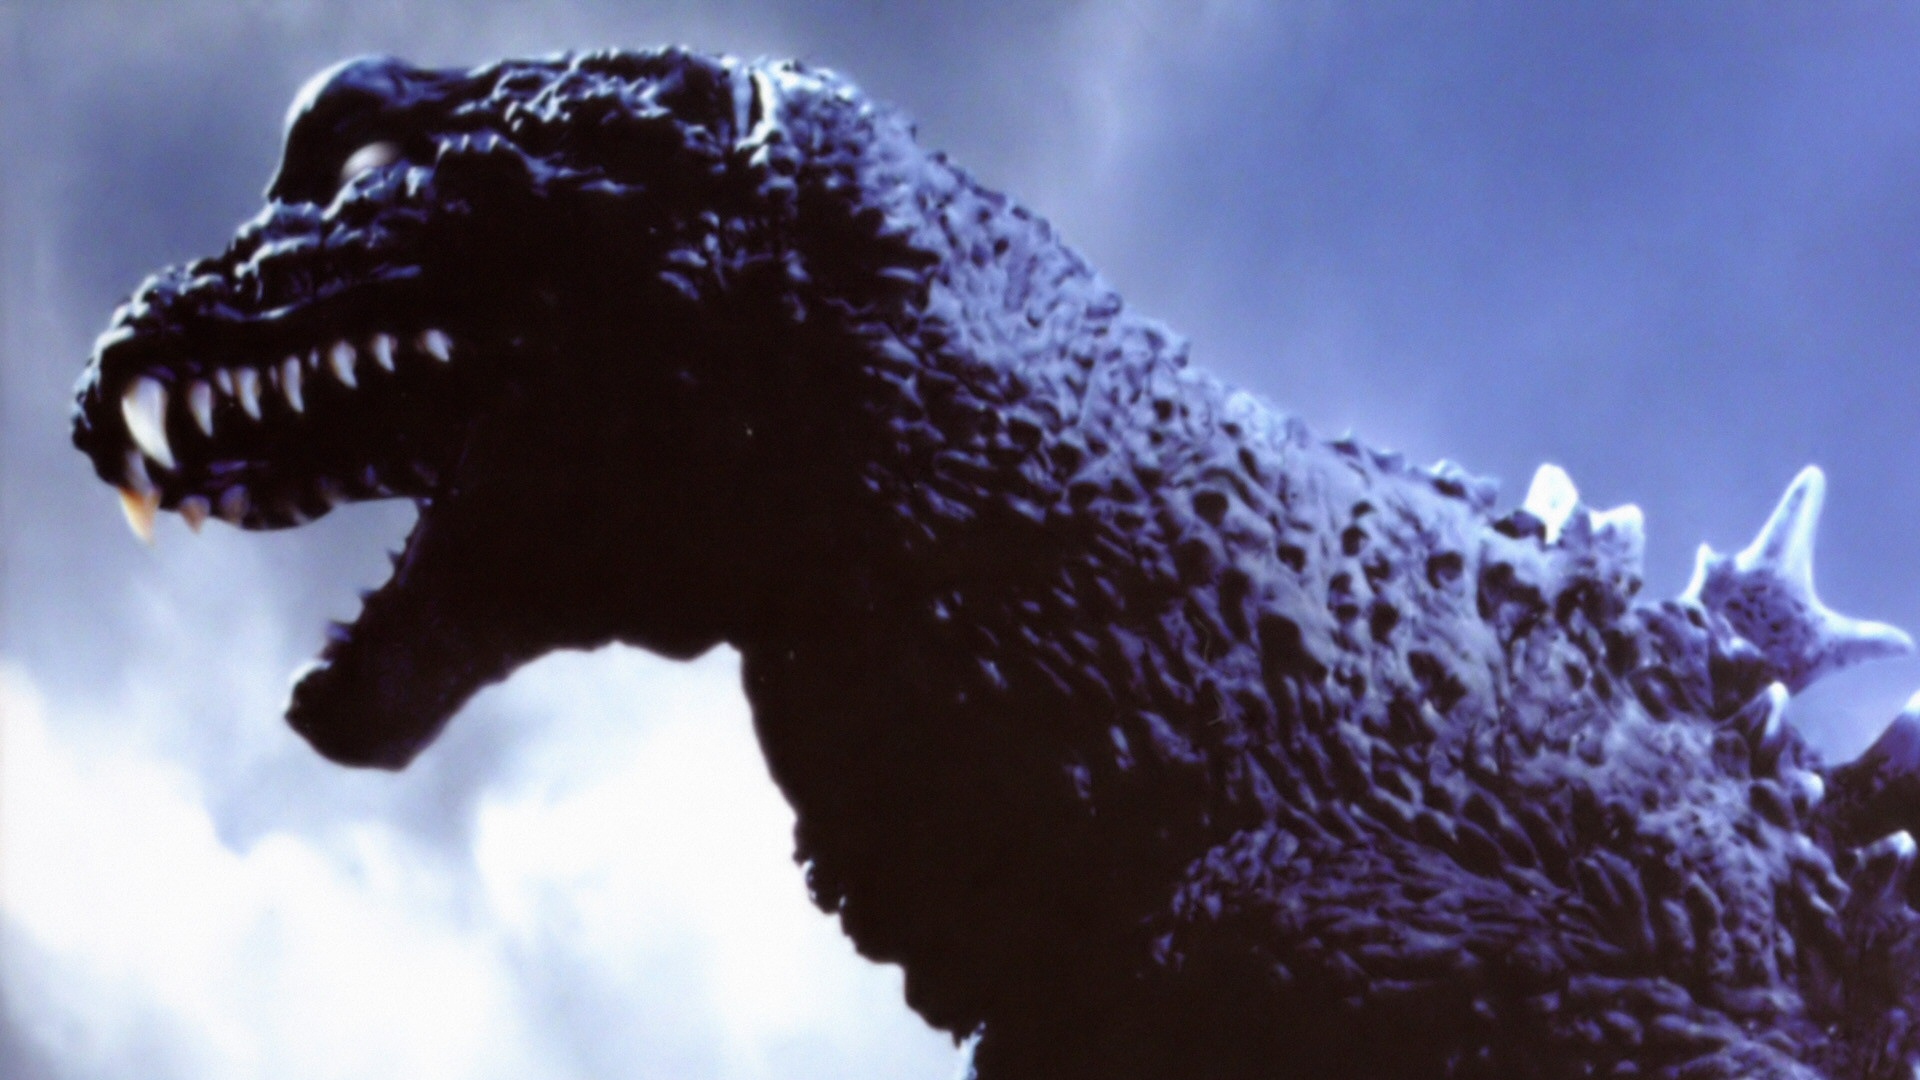 Free download Godzilla 2001 Download Movie Picture Photo Image [1920x1080] for your Desktop, Mobile & Tablet. Explore Godzilla Wallpaper Gallery. Wallpaper Gallery, Godzilla Wallpaper, Godzilla Wallpaper